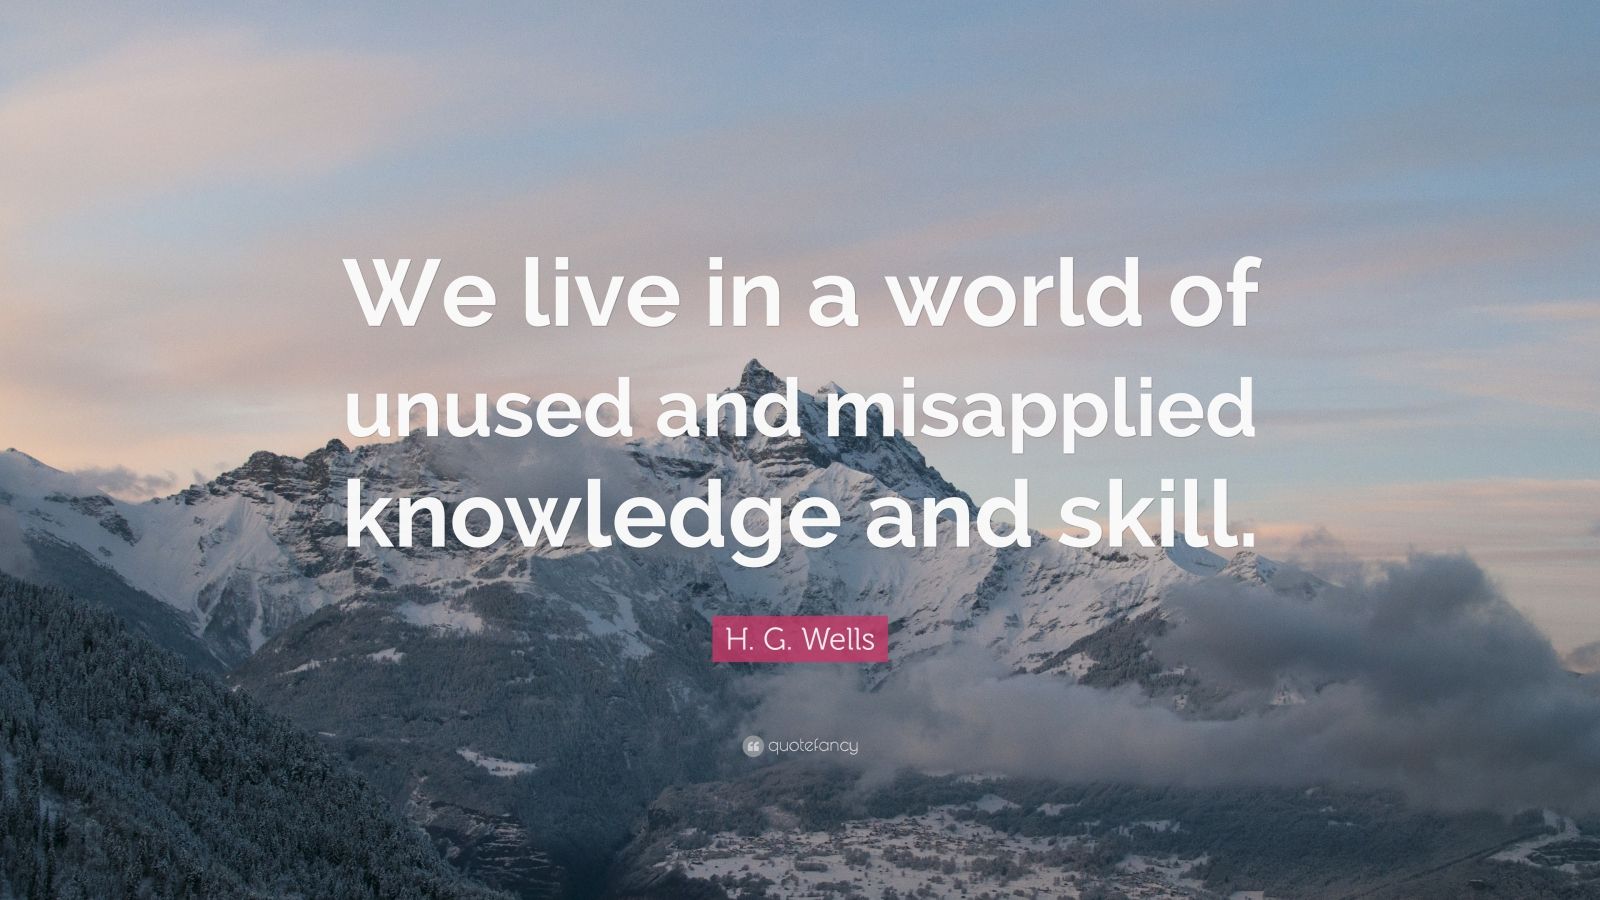 wells quote: "we live in a world of unused and misapllied